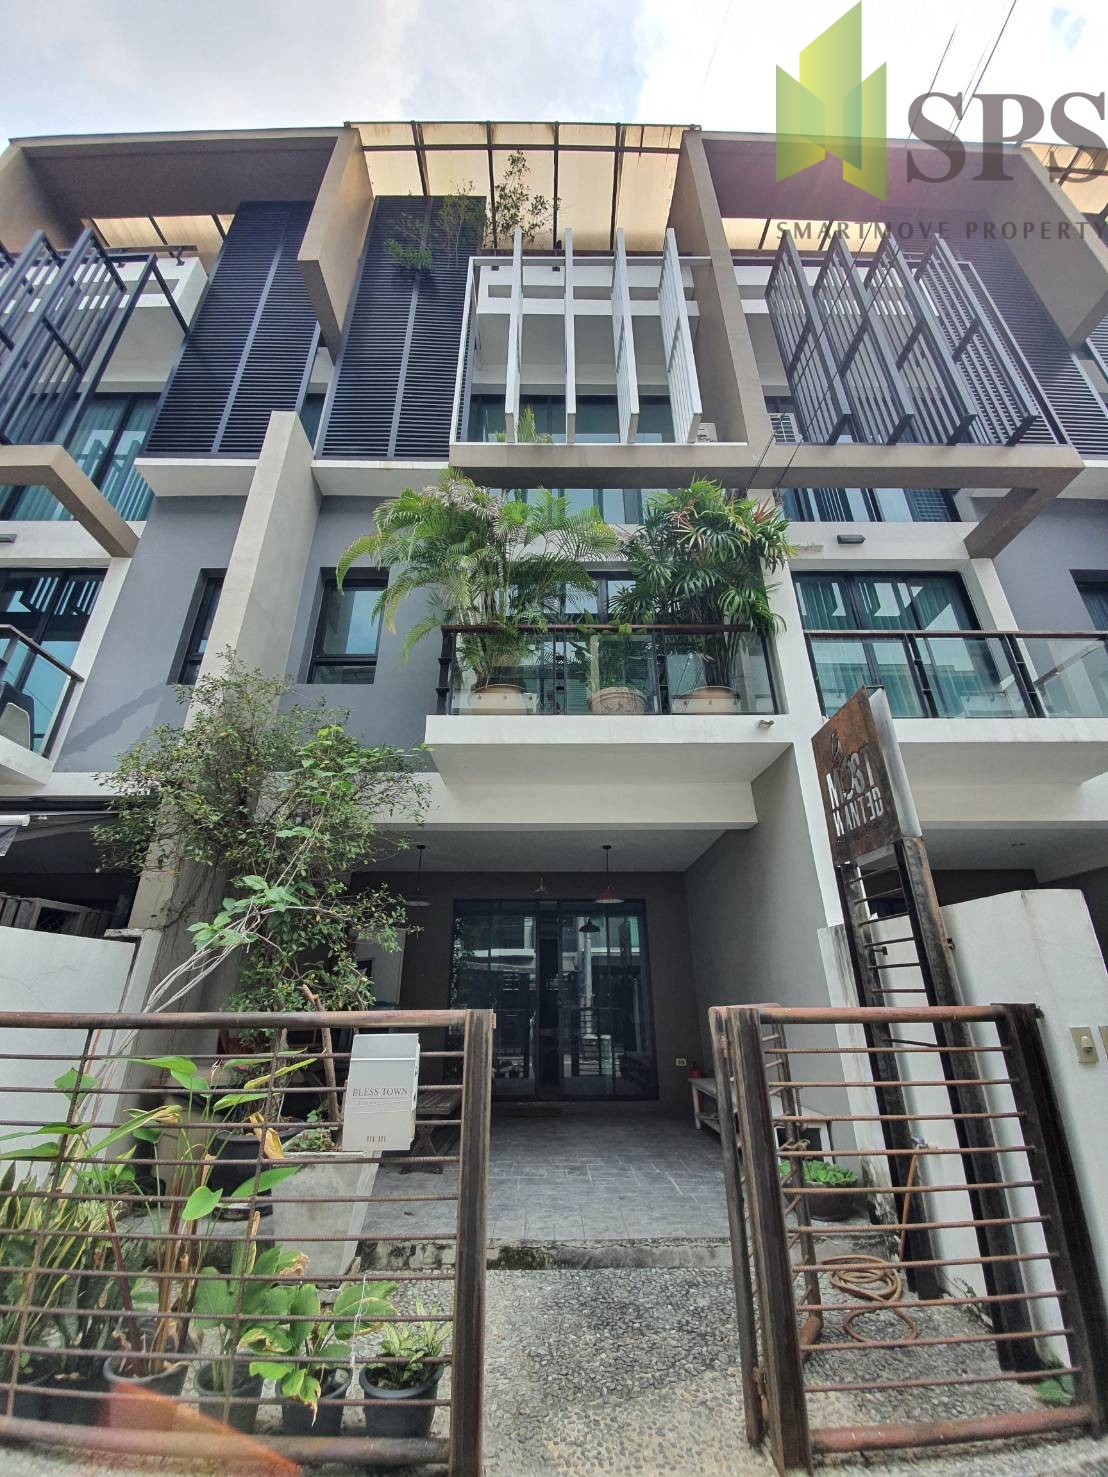 Townhome for RENT in Bless Town Sukhumvit 50 (SPSP425)